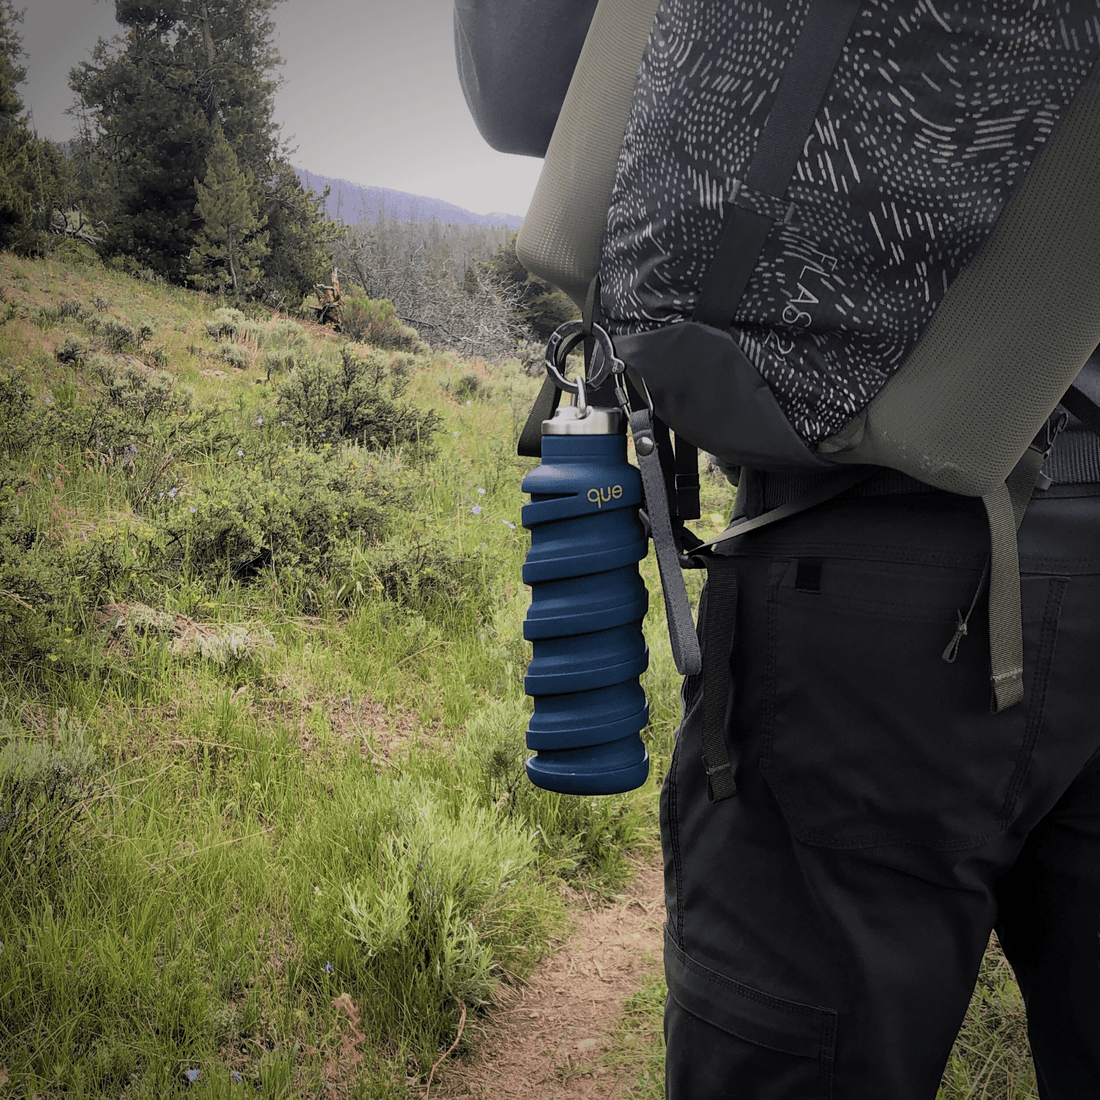 Que Bottle, Shown Expanded with Accessory Combo (Carabiner Bottle Opener, Bottle Cap with Loop, and Carry Strap) Sold Separately. Blue Que Bottle Hanging from Back Pack on Mountain Trail.